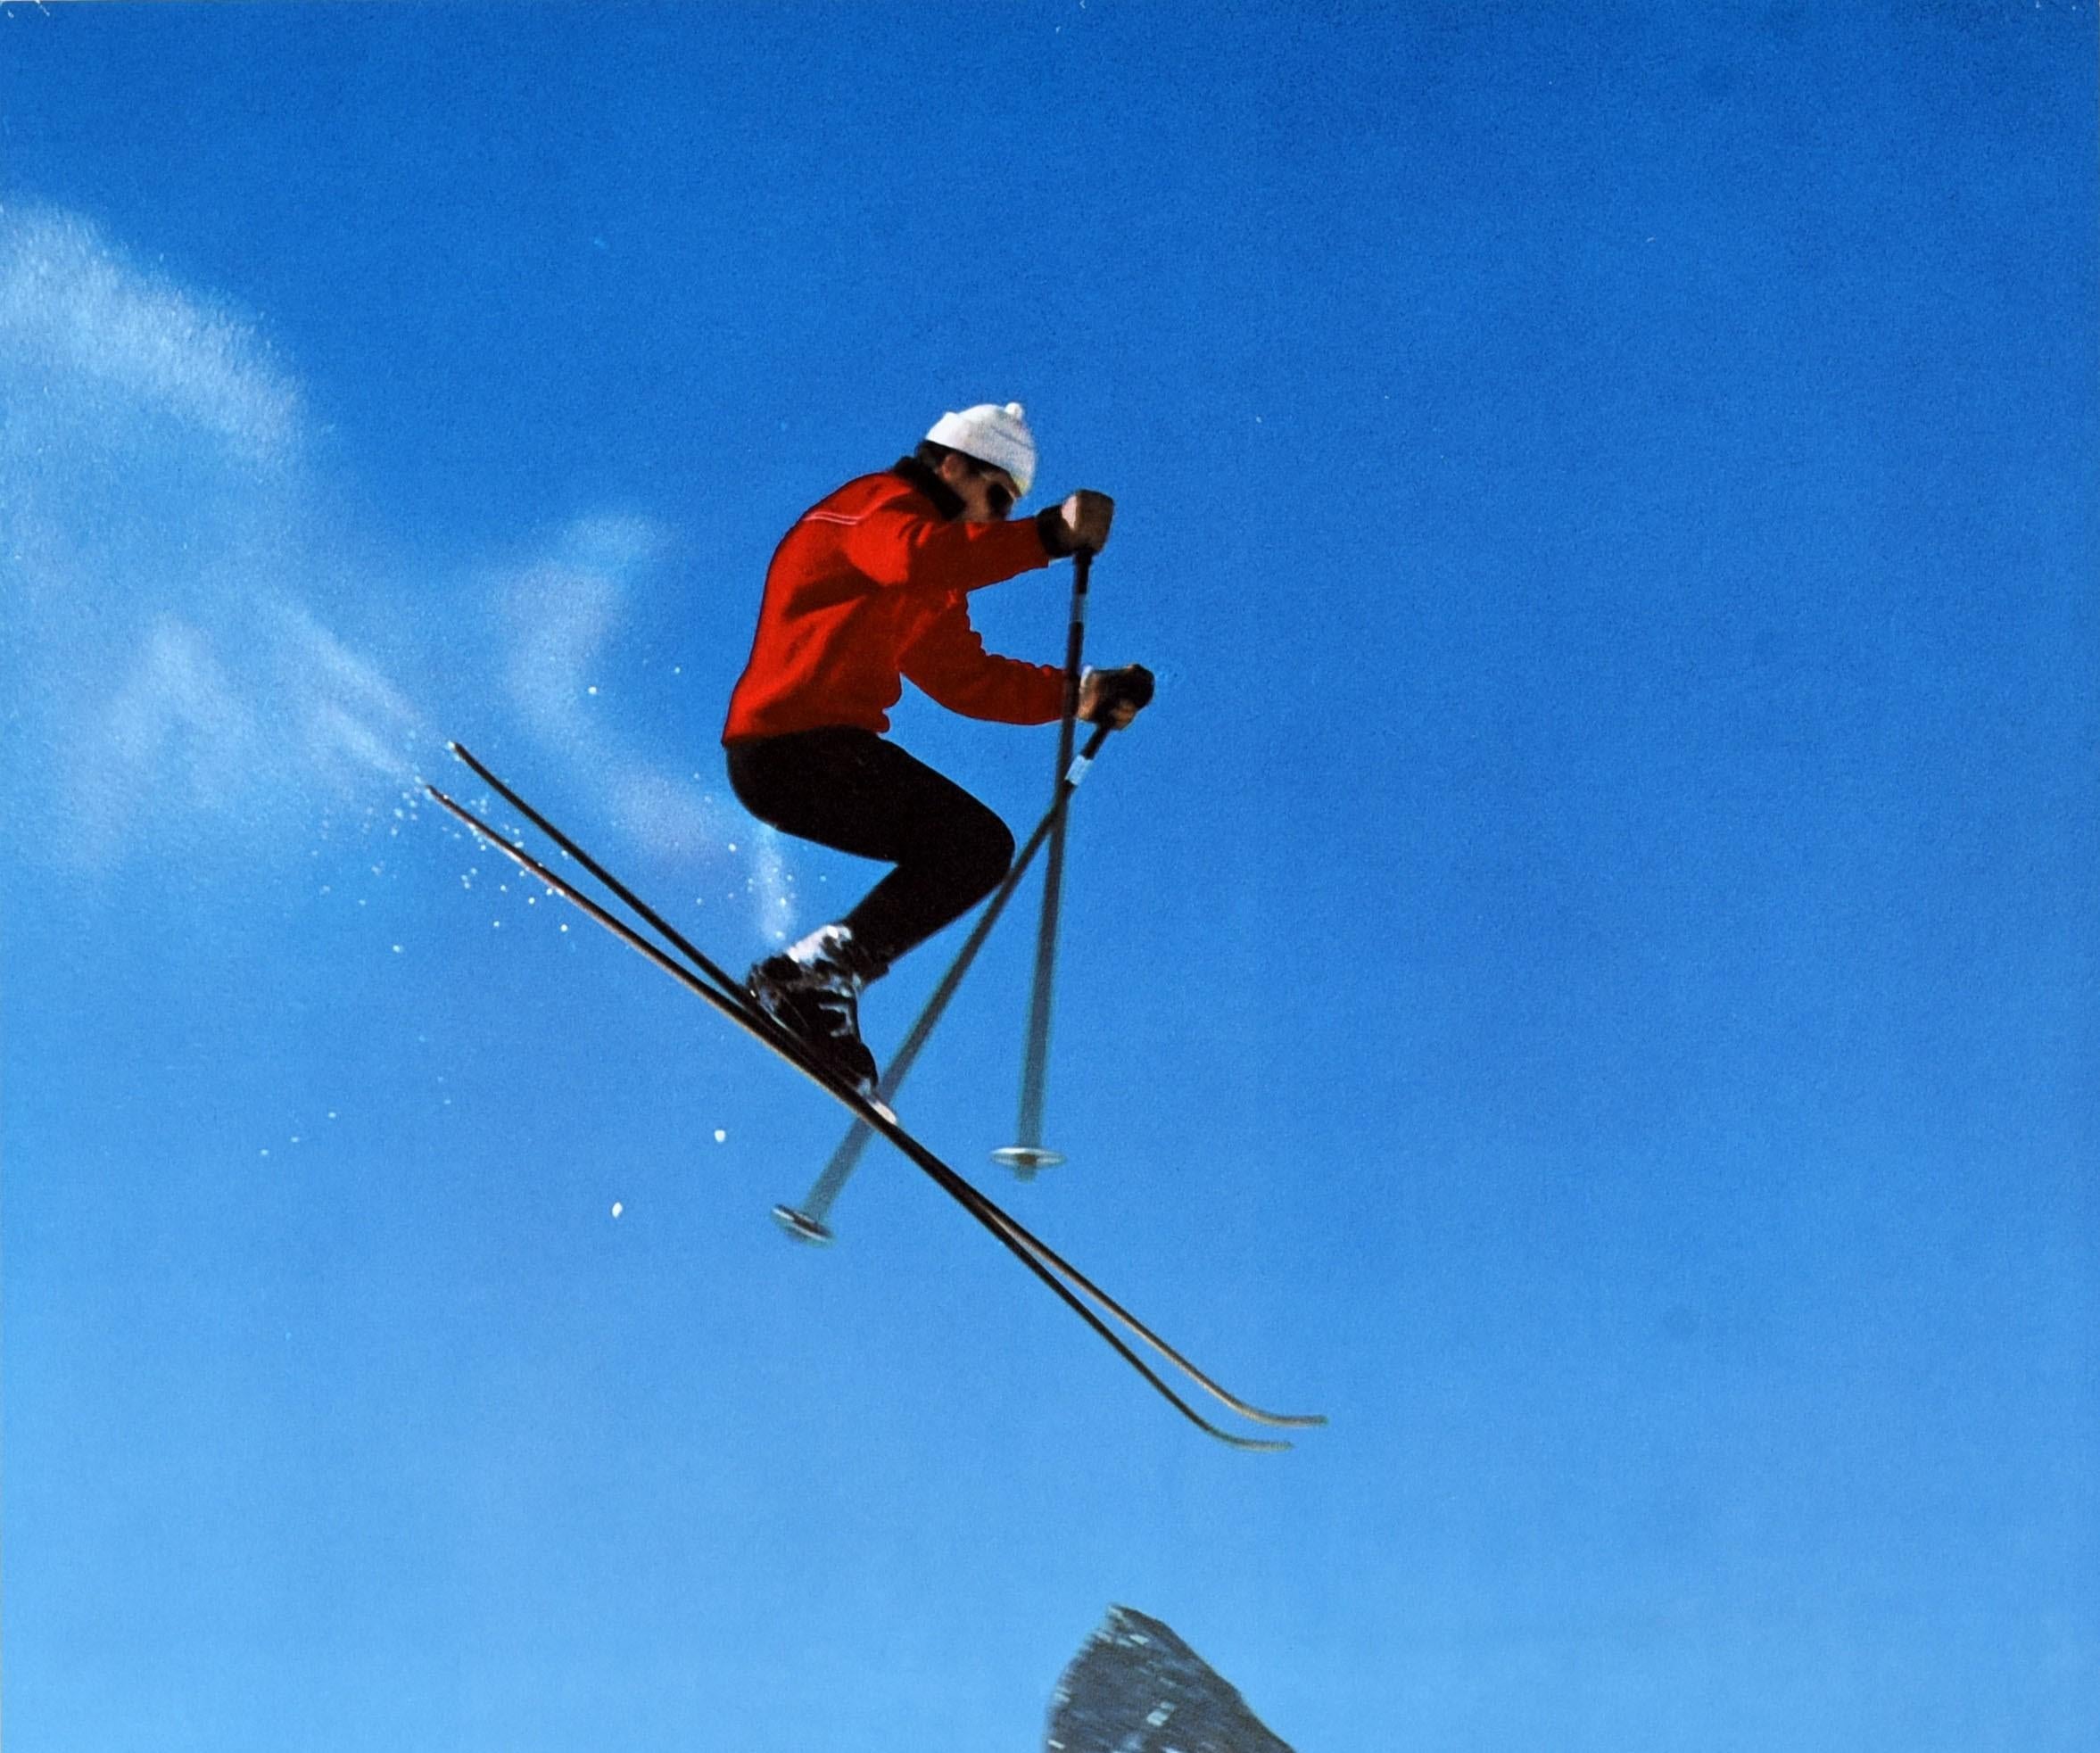 Original vintage skiing and winter sport travel poster for Zermatt Switzerland Schweiz Suisse featuring a dynamic photo by Alfred Perren-Barberini of a skier wearing a red ski jacket and white hat jumping in front of the iconic Matterhorn mountain